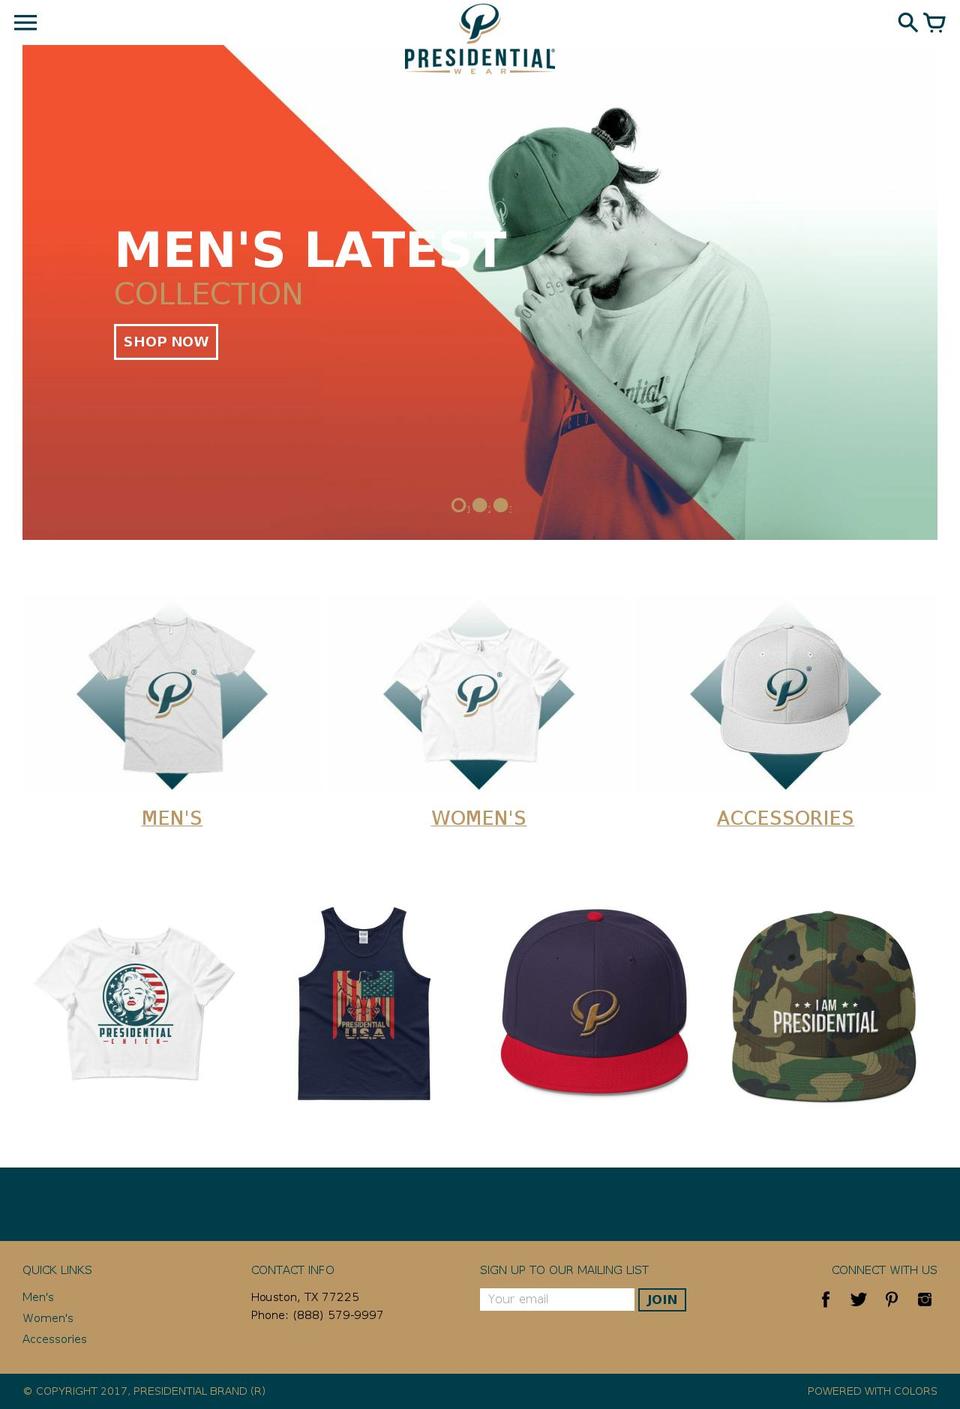 Colors Shopify theme site example buypresidentialwear.com